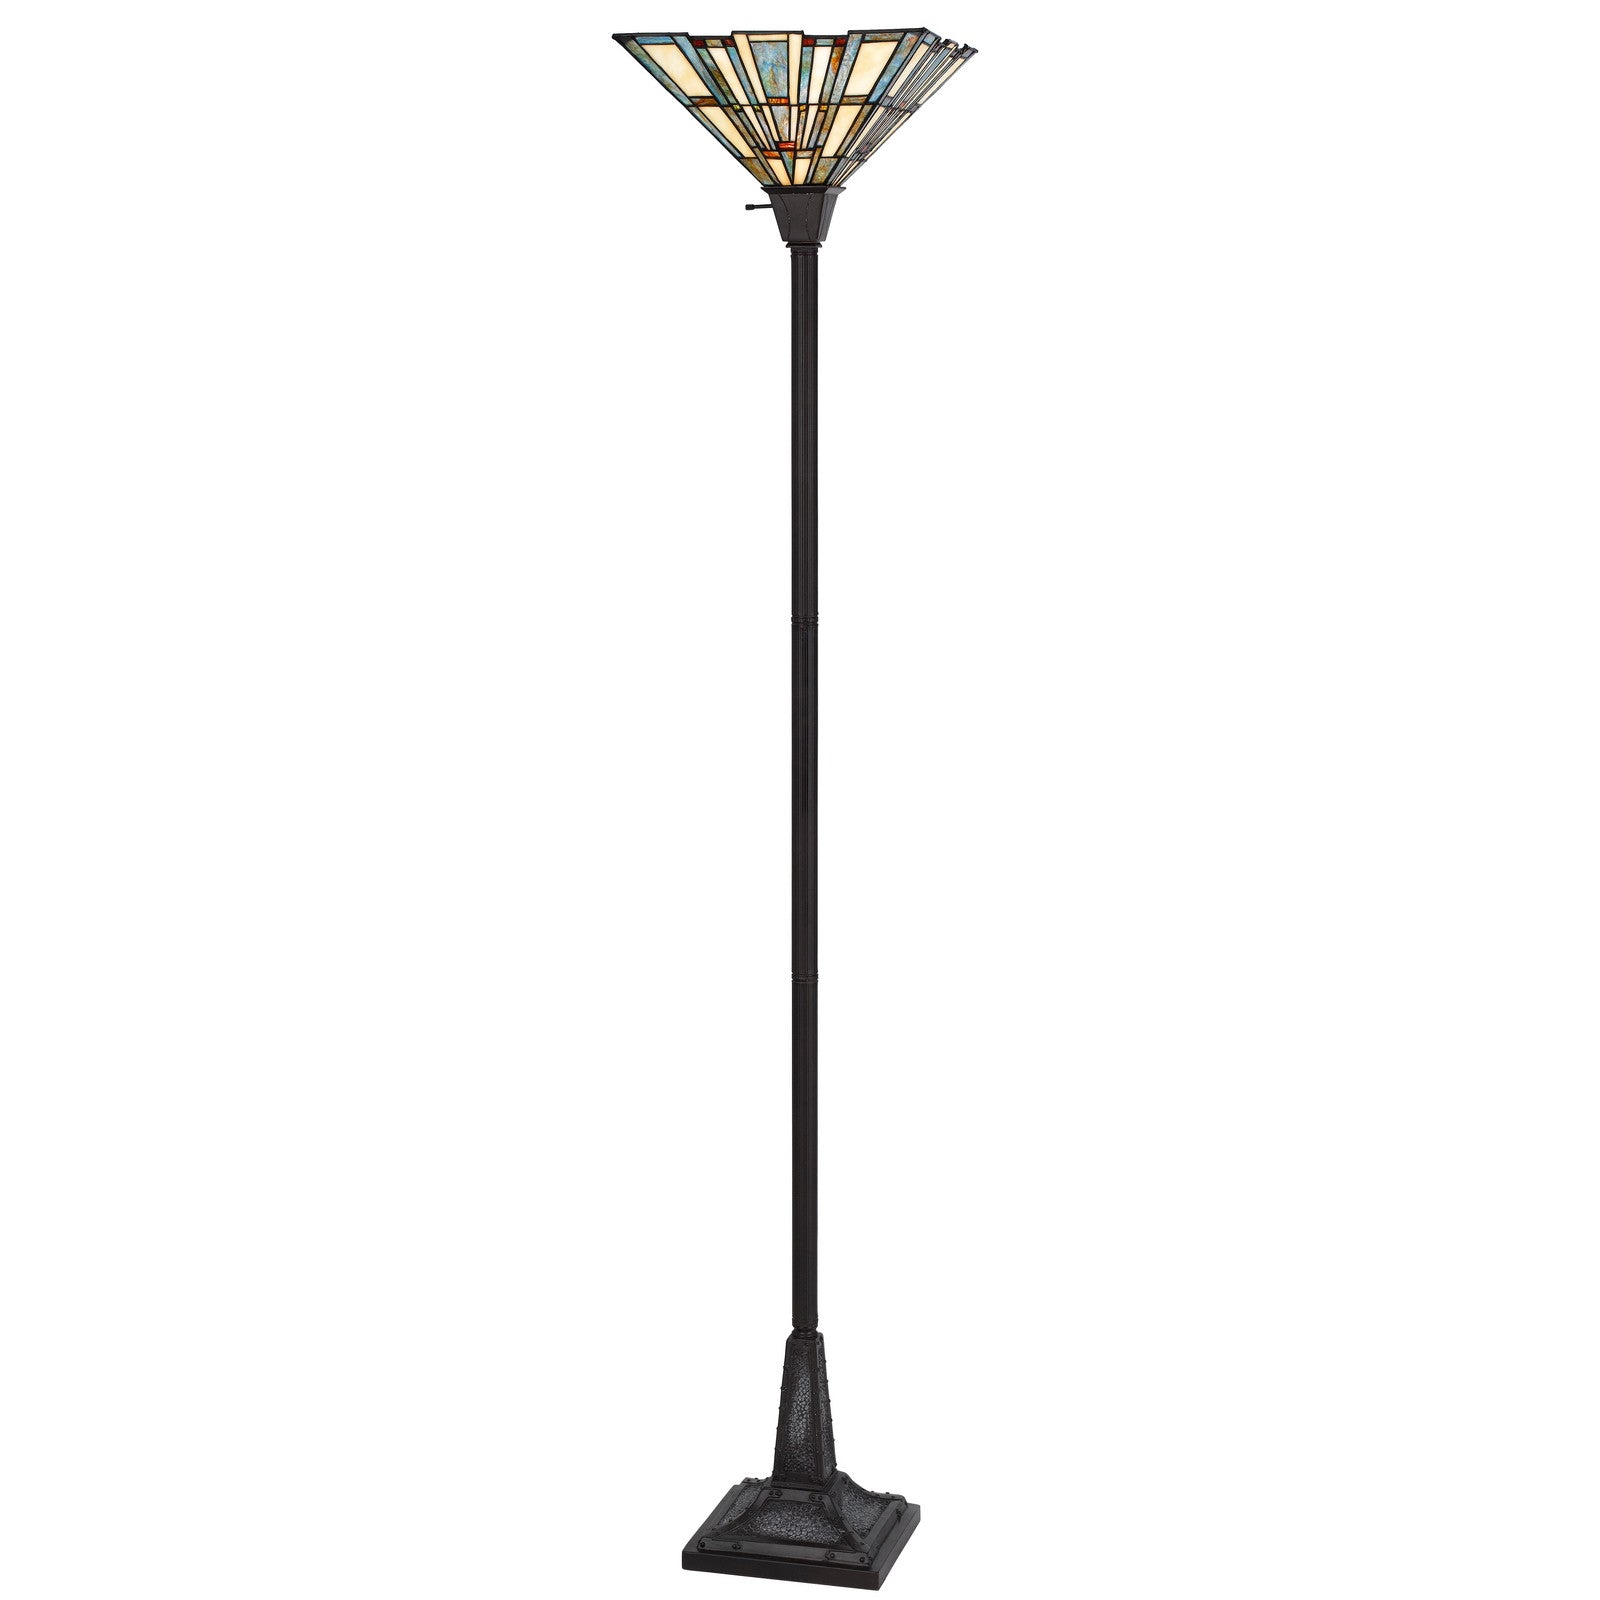 72" Bronze Torchiere Floor Lamp With Gray and Ivory Abstract Tiffany Glass Novelty Shade